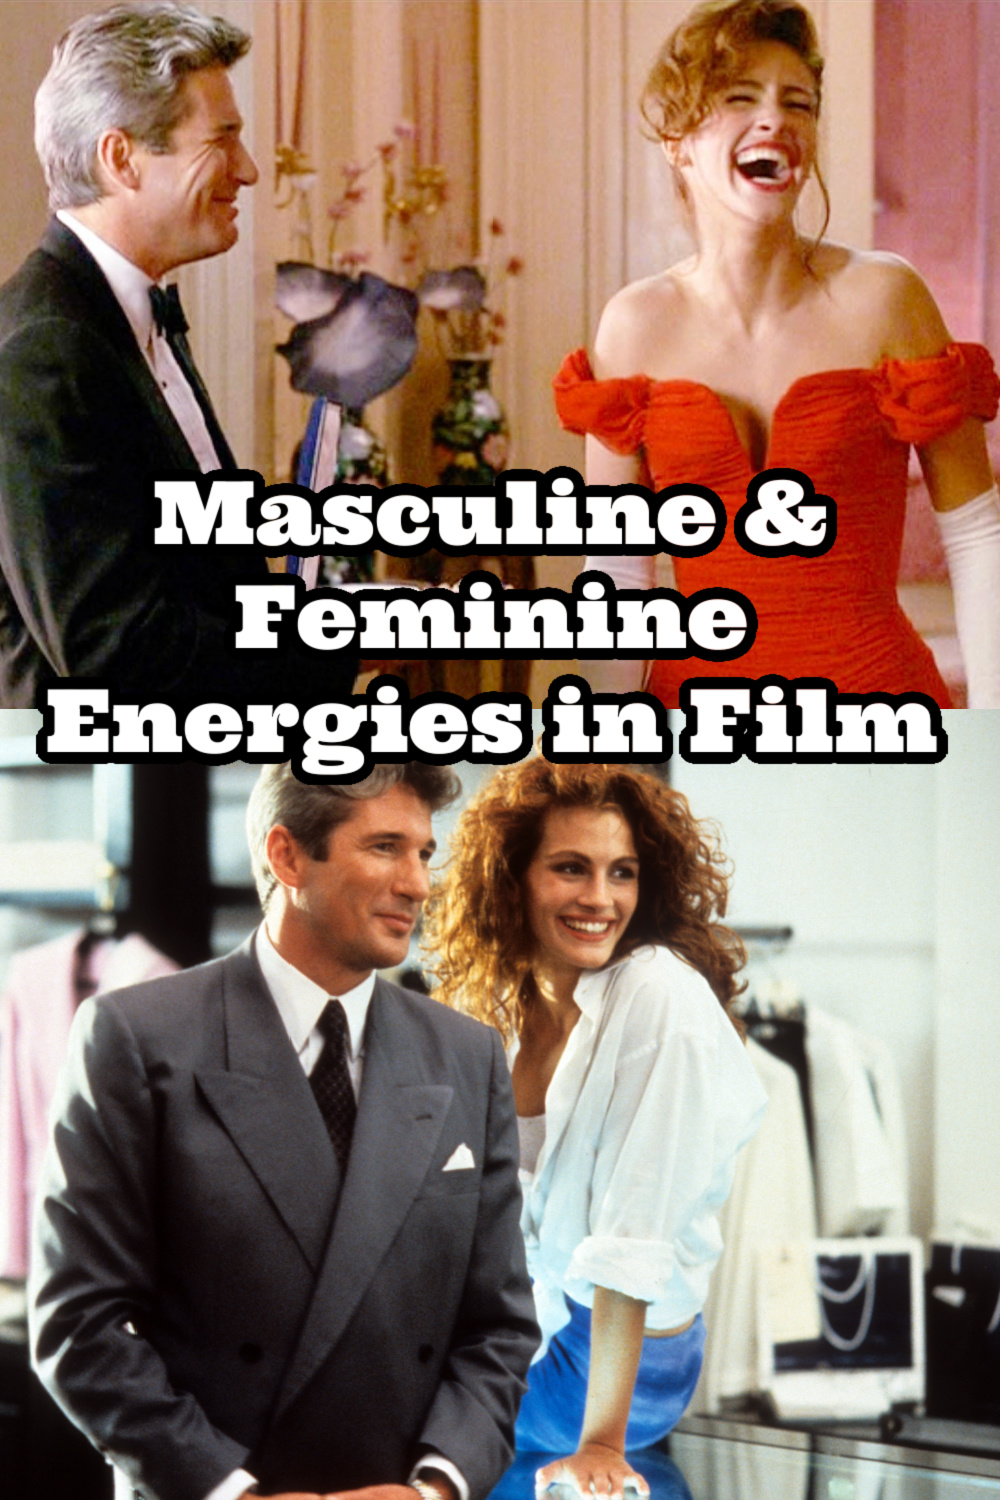 pretty woman movie analysis, how to attract a masculine man, masculine shield as a woman, toxic masculinity vs divine masculinity, feminine and masculine energy in relationships, difference between feminine and masculine energy, feminine radiance is irresistible, feminine energy in relationships, magnetic feminine energy, healing your feminine energy, how to connect to your feminine energy, femininity is beautiful, feminine radiance, femininity in relationships, wounded masculine energy, wounded feminine energy, wounded masculine energy in a woman, wounded masculine energy in a female, understanding masculine and feminine energy, sexual polarity in relationships, sexual polarity, Everyday starlet, sarah blodgett,